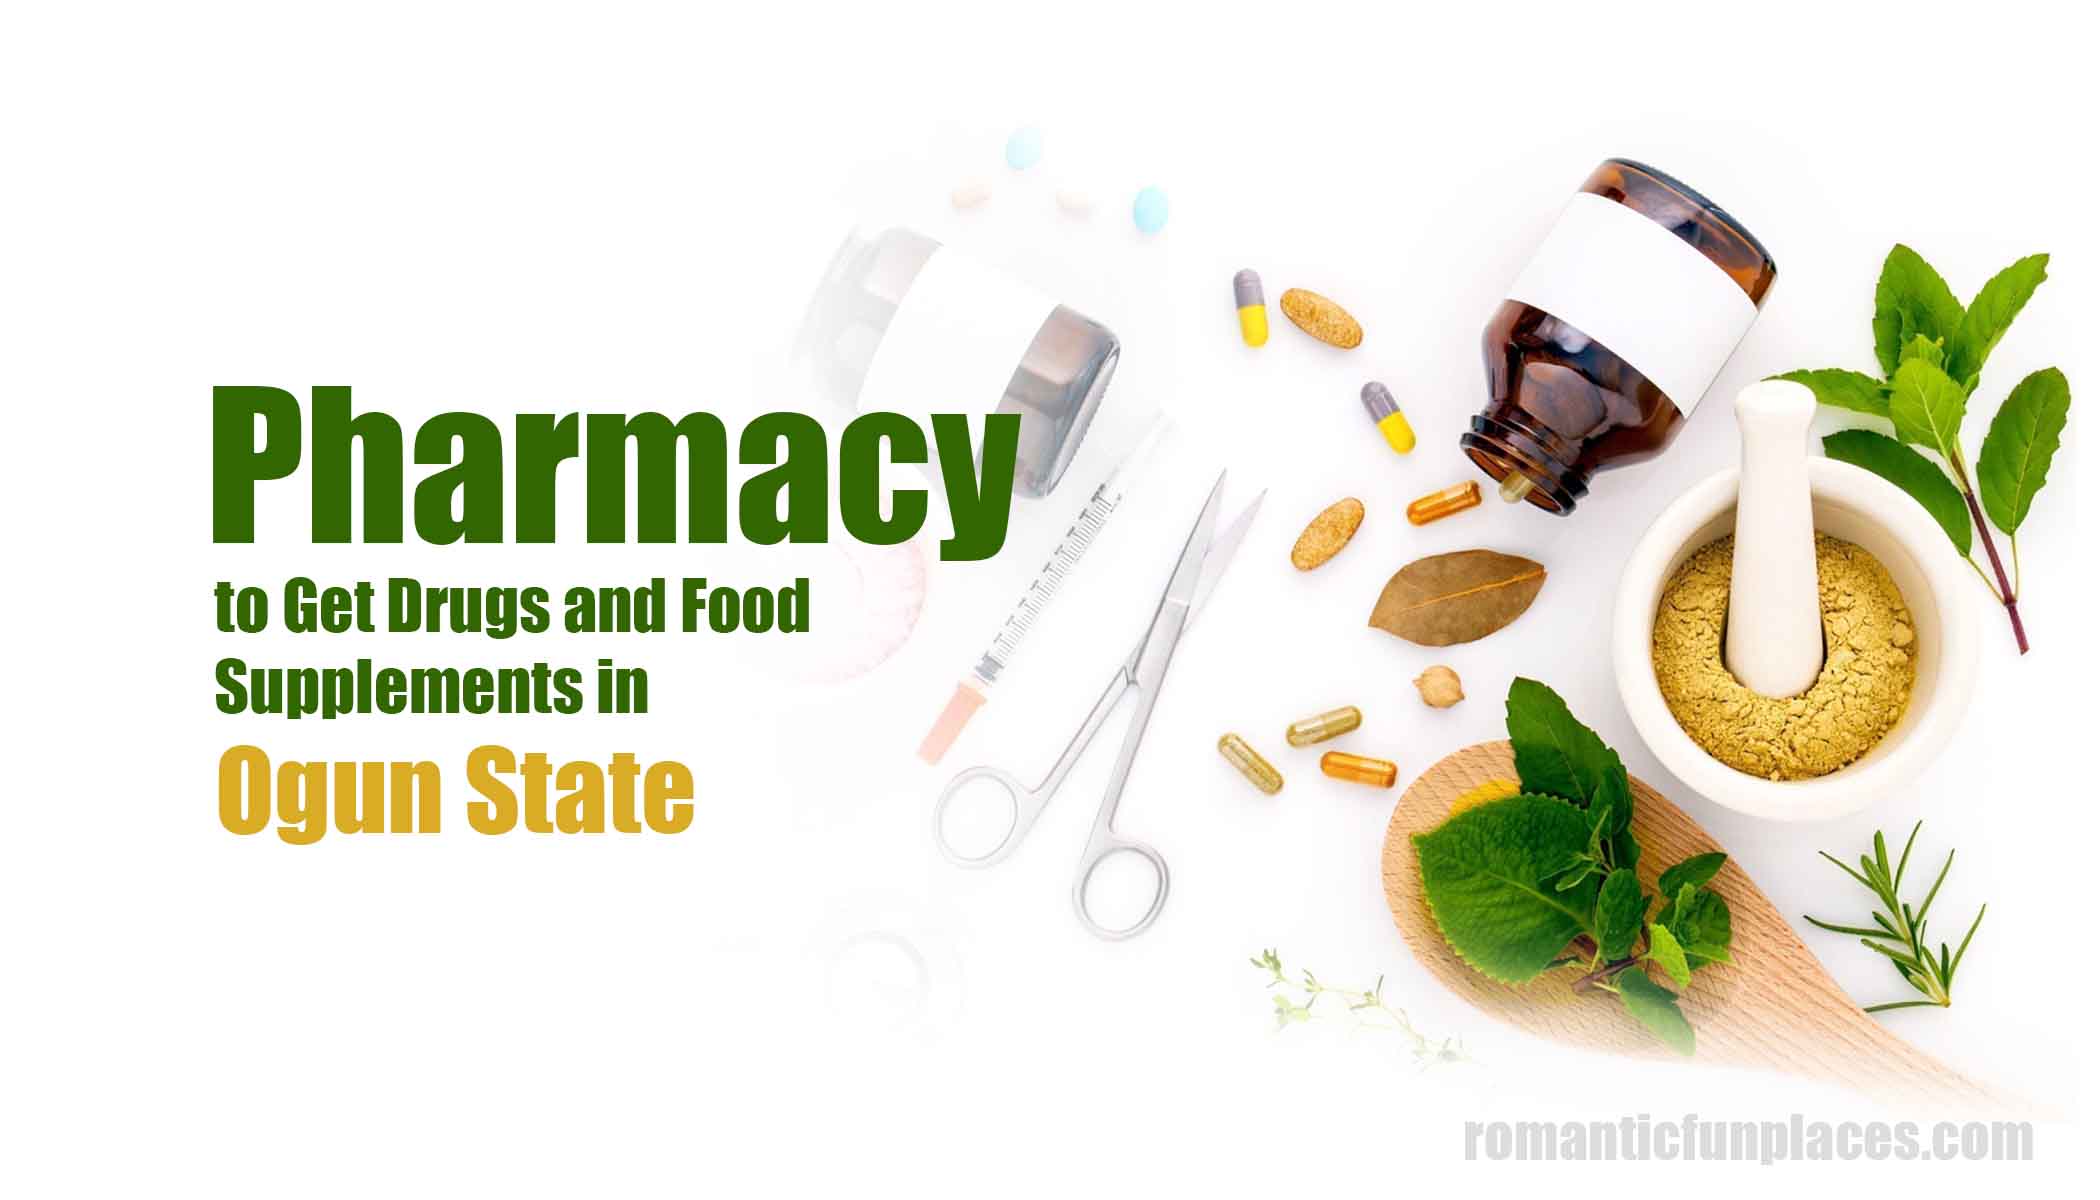 Pharmacy to Get Drugs and Food Supplements in Ogun State